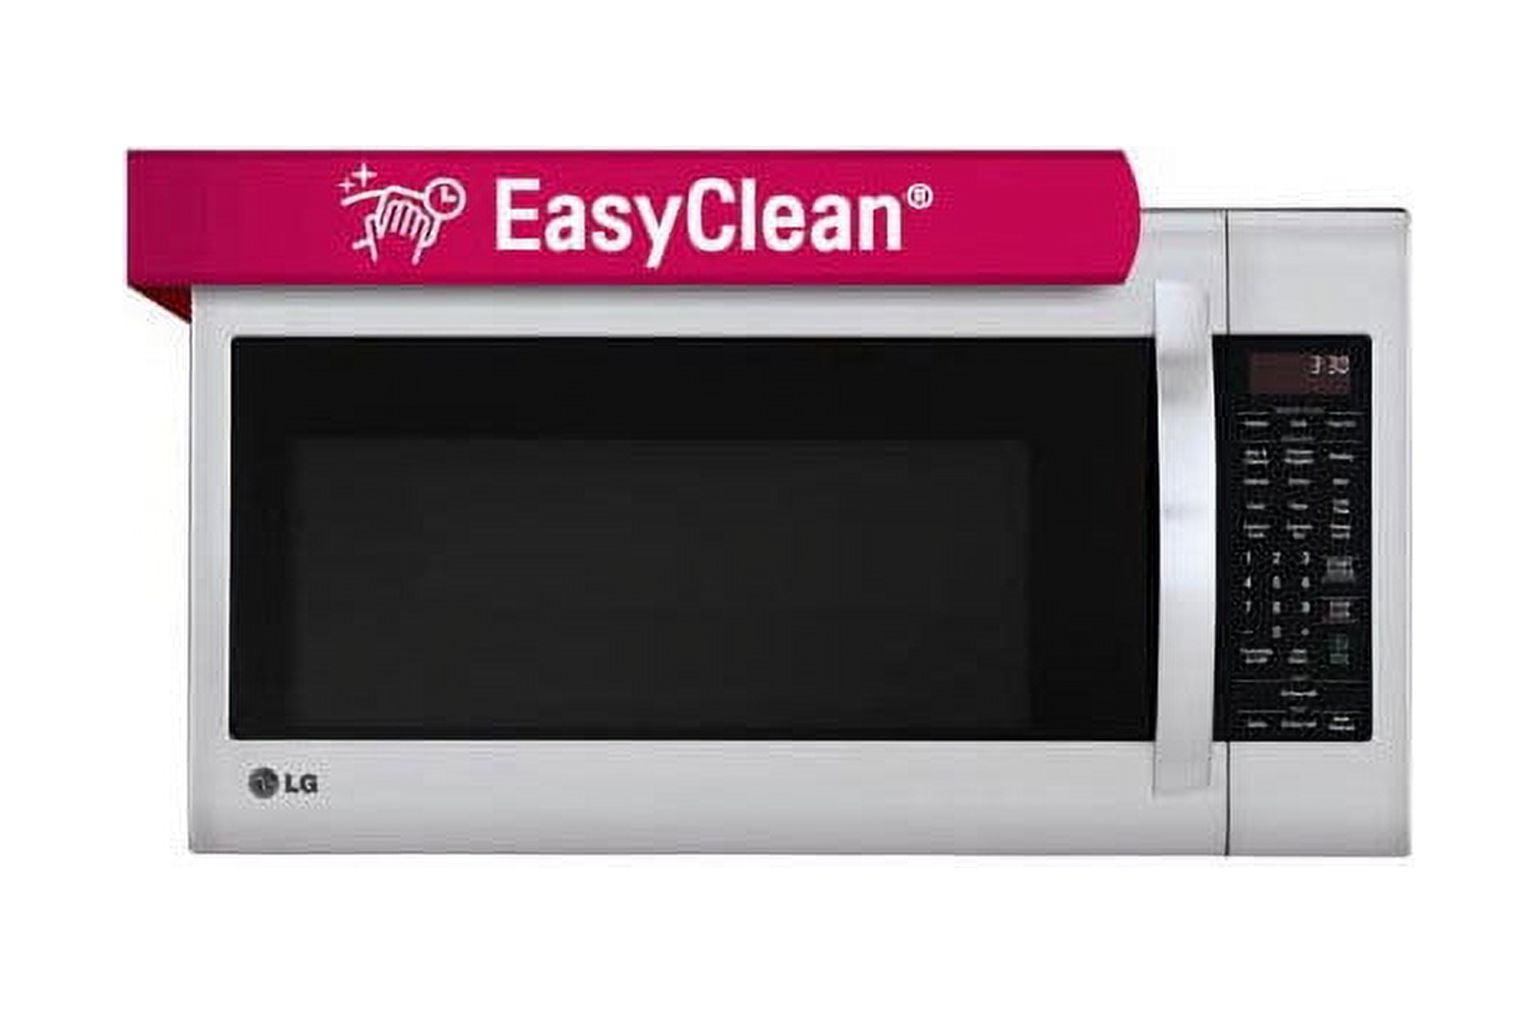 LMV2031ST - Microwave oven - built-in - 2 cu. ft - 1000 W - stainless steel with built-in exhaust system - image 1 of 2